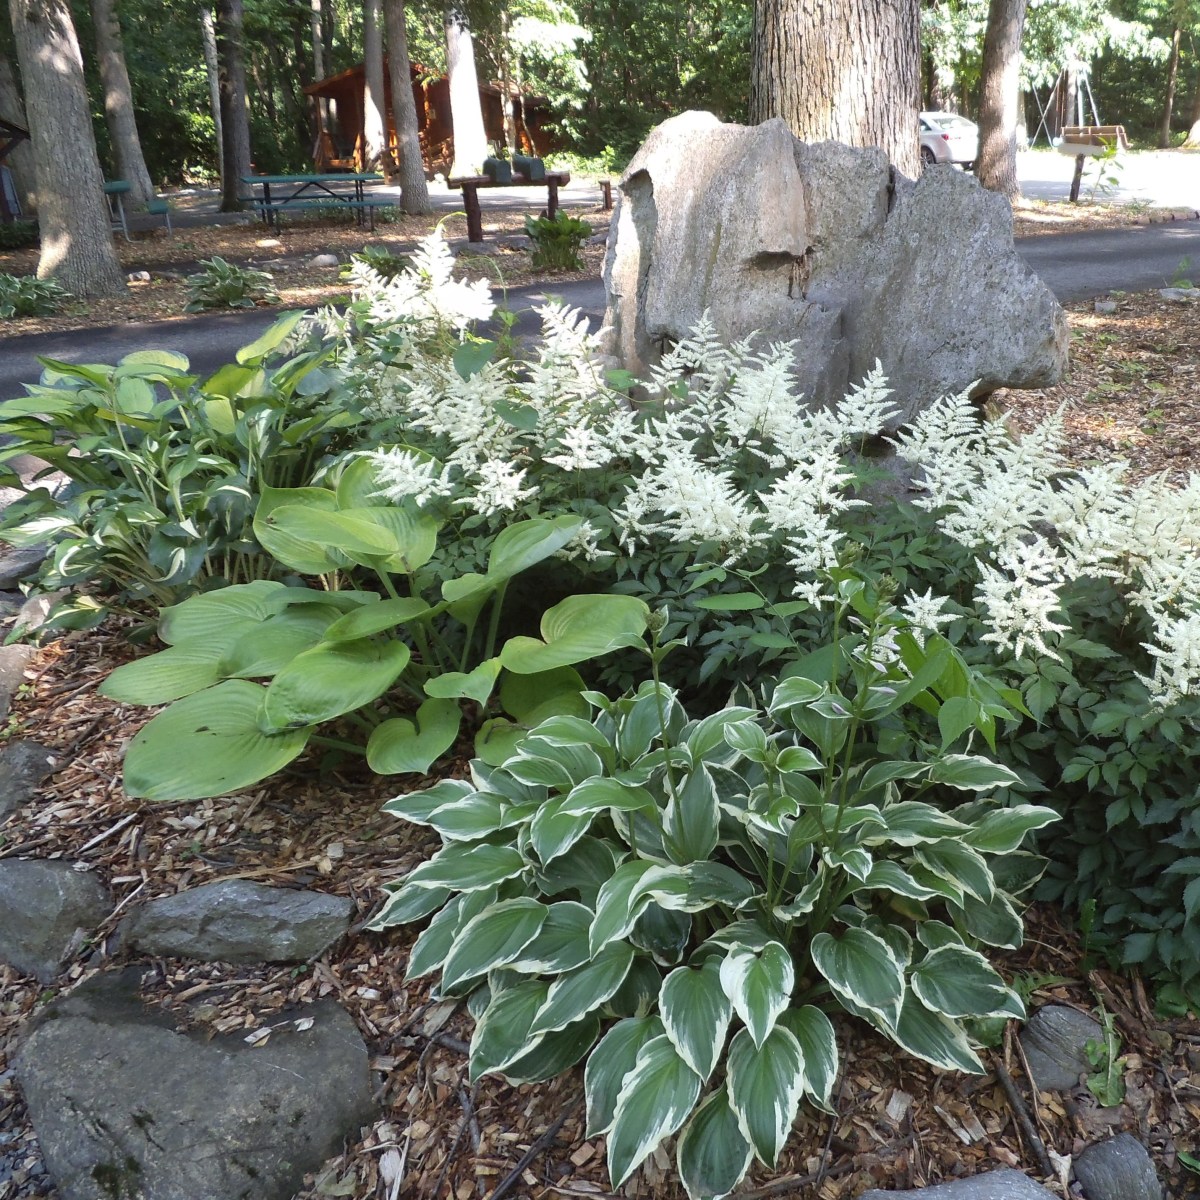 Great hosta grouping. I saw these at an RV park. The taller, flowering plants at the back are white astilbe.  Placing these in front of the feature rock makes a dramatic focal point. 